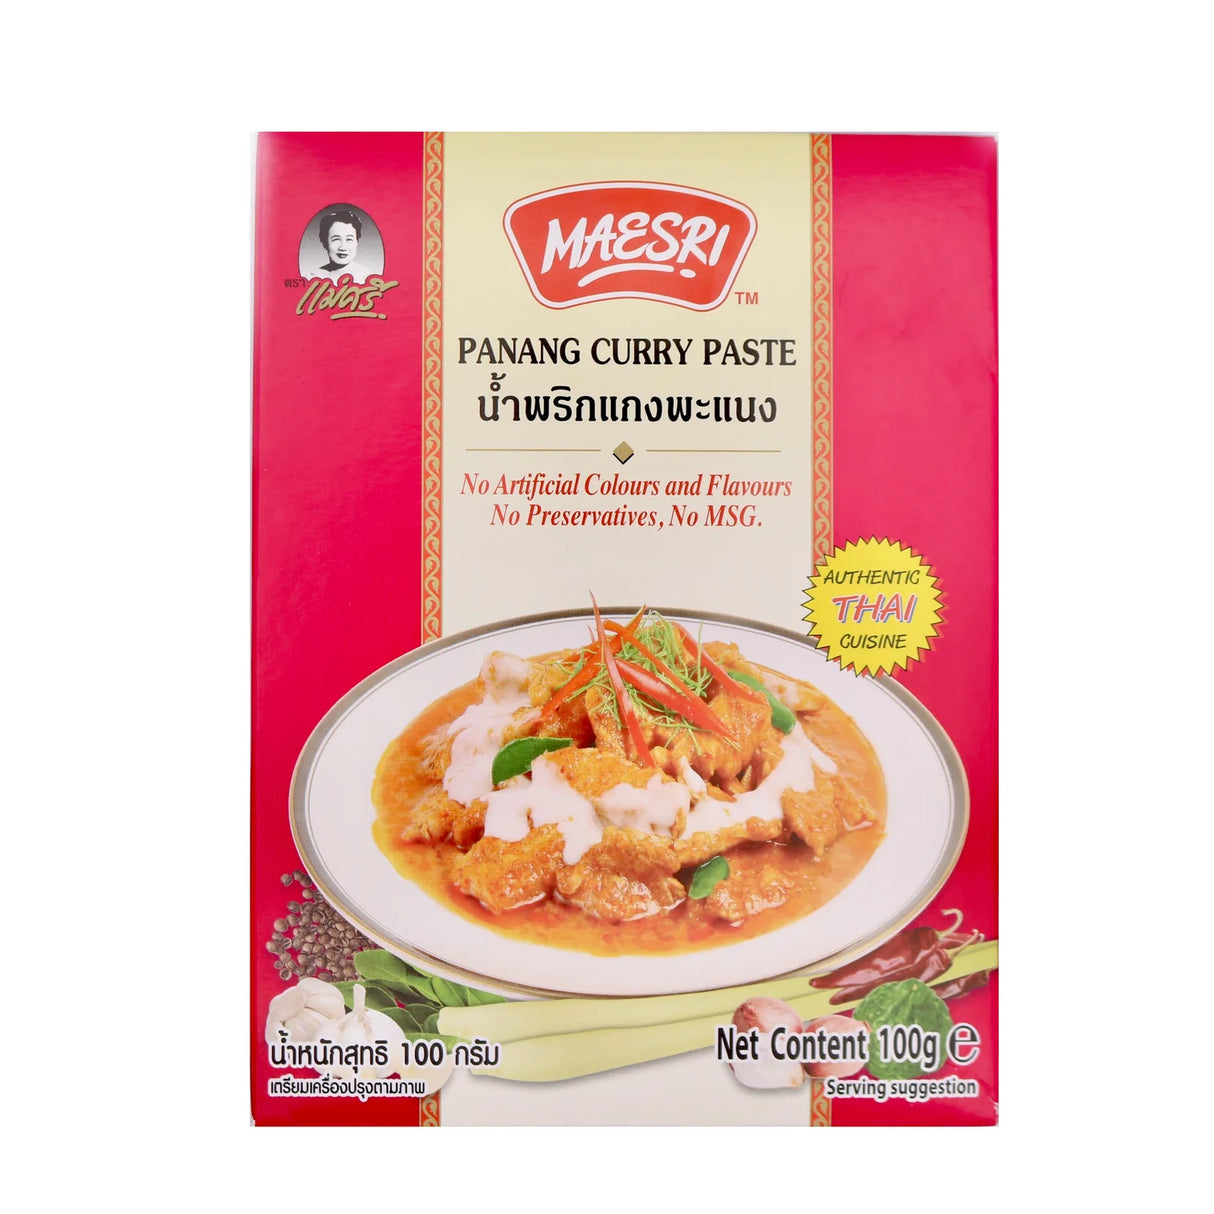 Wheat MAESRI Panang Curry Paste 100g